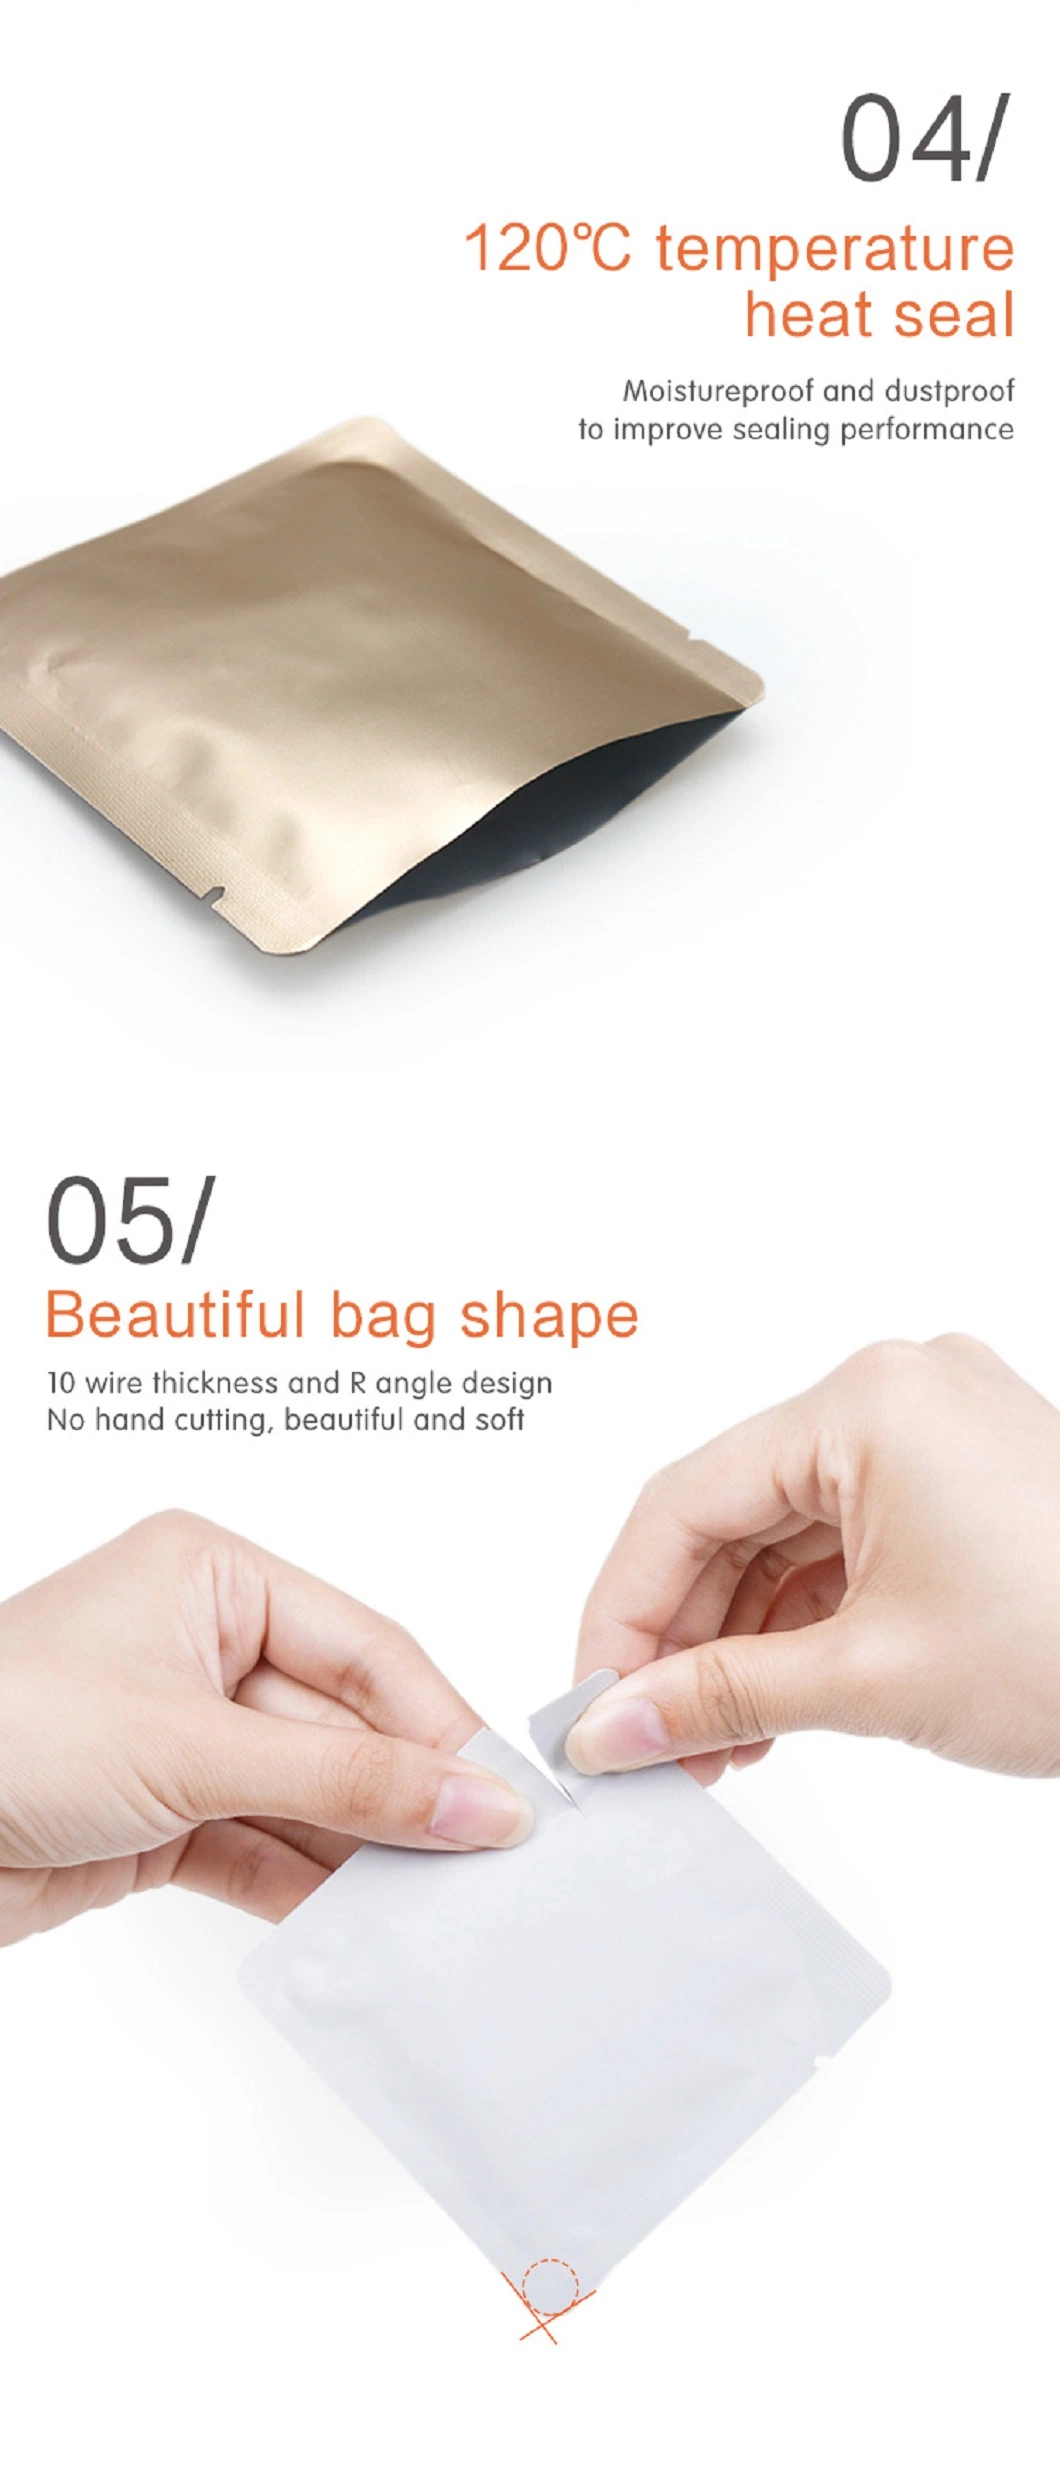 Low MOQ 500 Mini Heat Seal Pouch Sample Packet for Body Serum 7g Bag